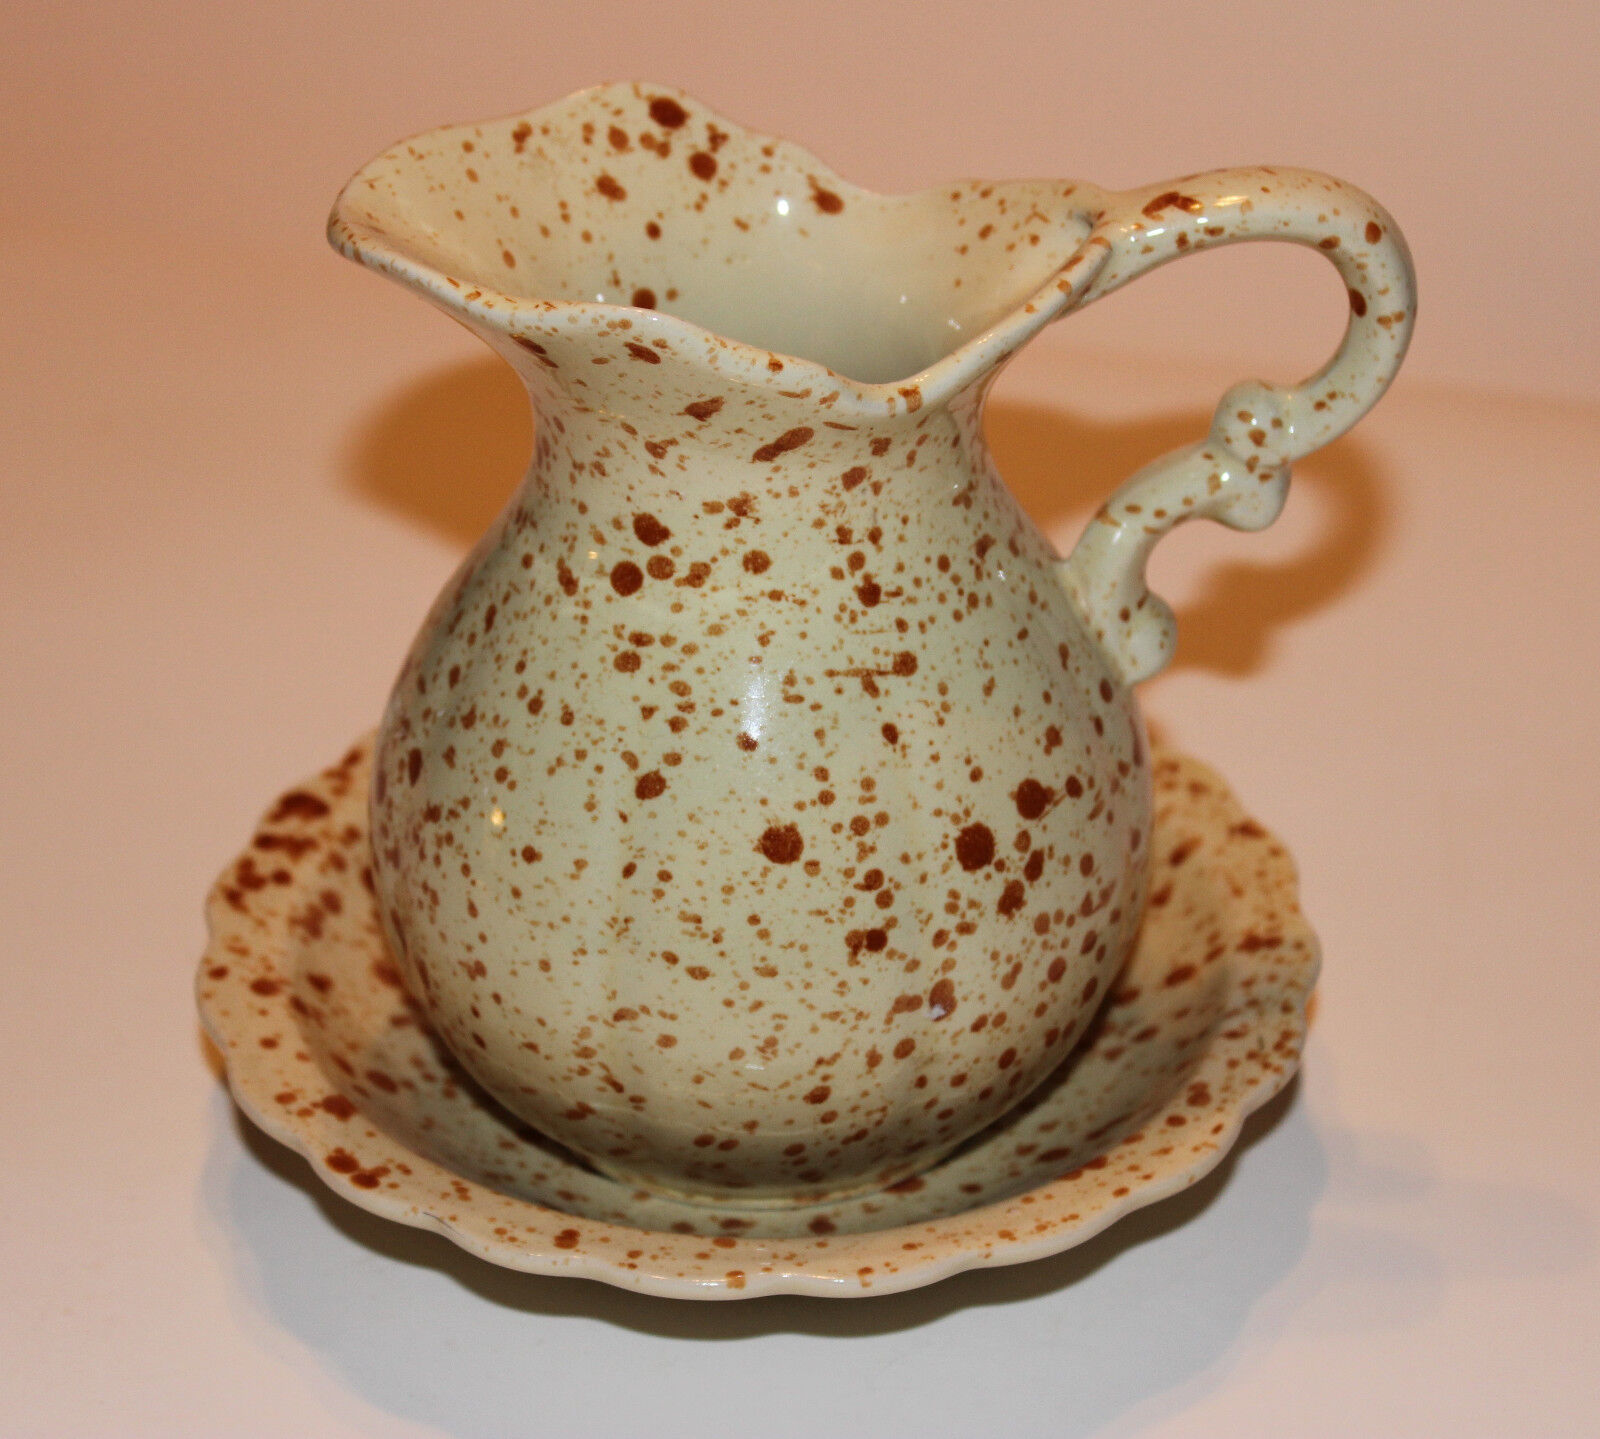 Brown Speckled Ceramic Pitcher Set – Countryside Collection by Flambro Imports - $15.00